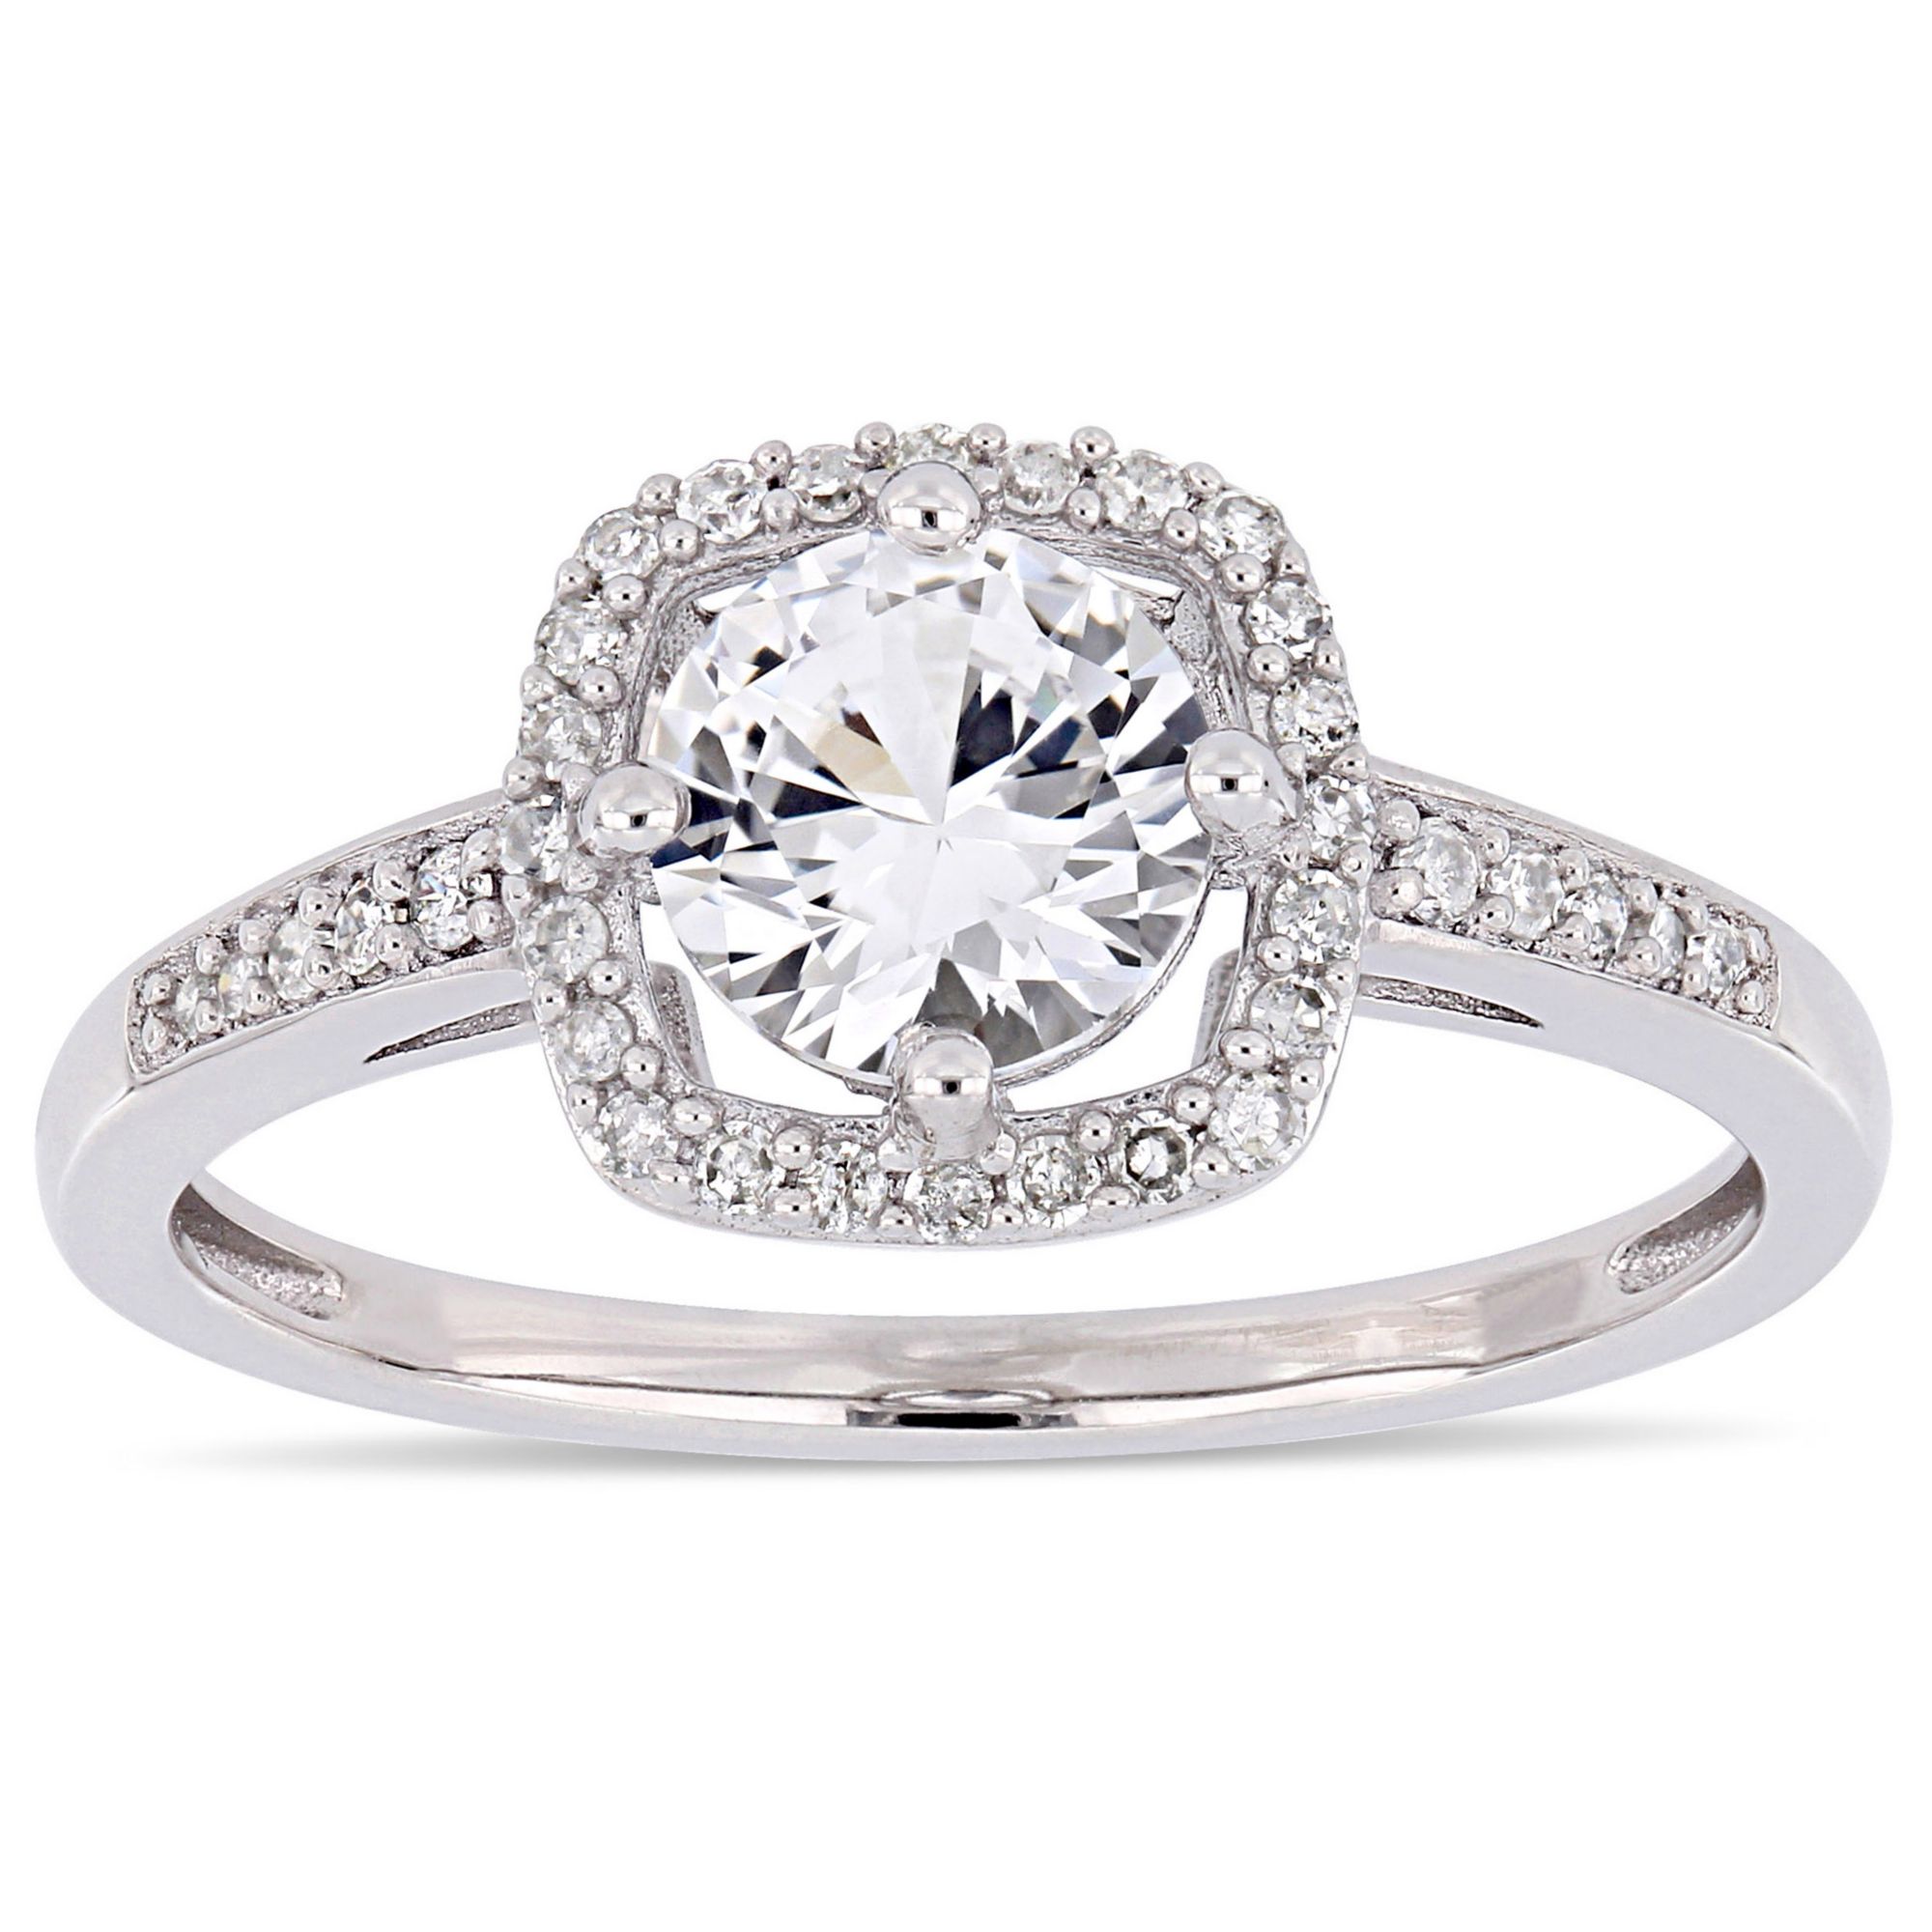 1 ct. t.w. White Sapphire and Diamond Accent Halo Ring in 10k White Gold, Size 6